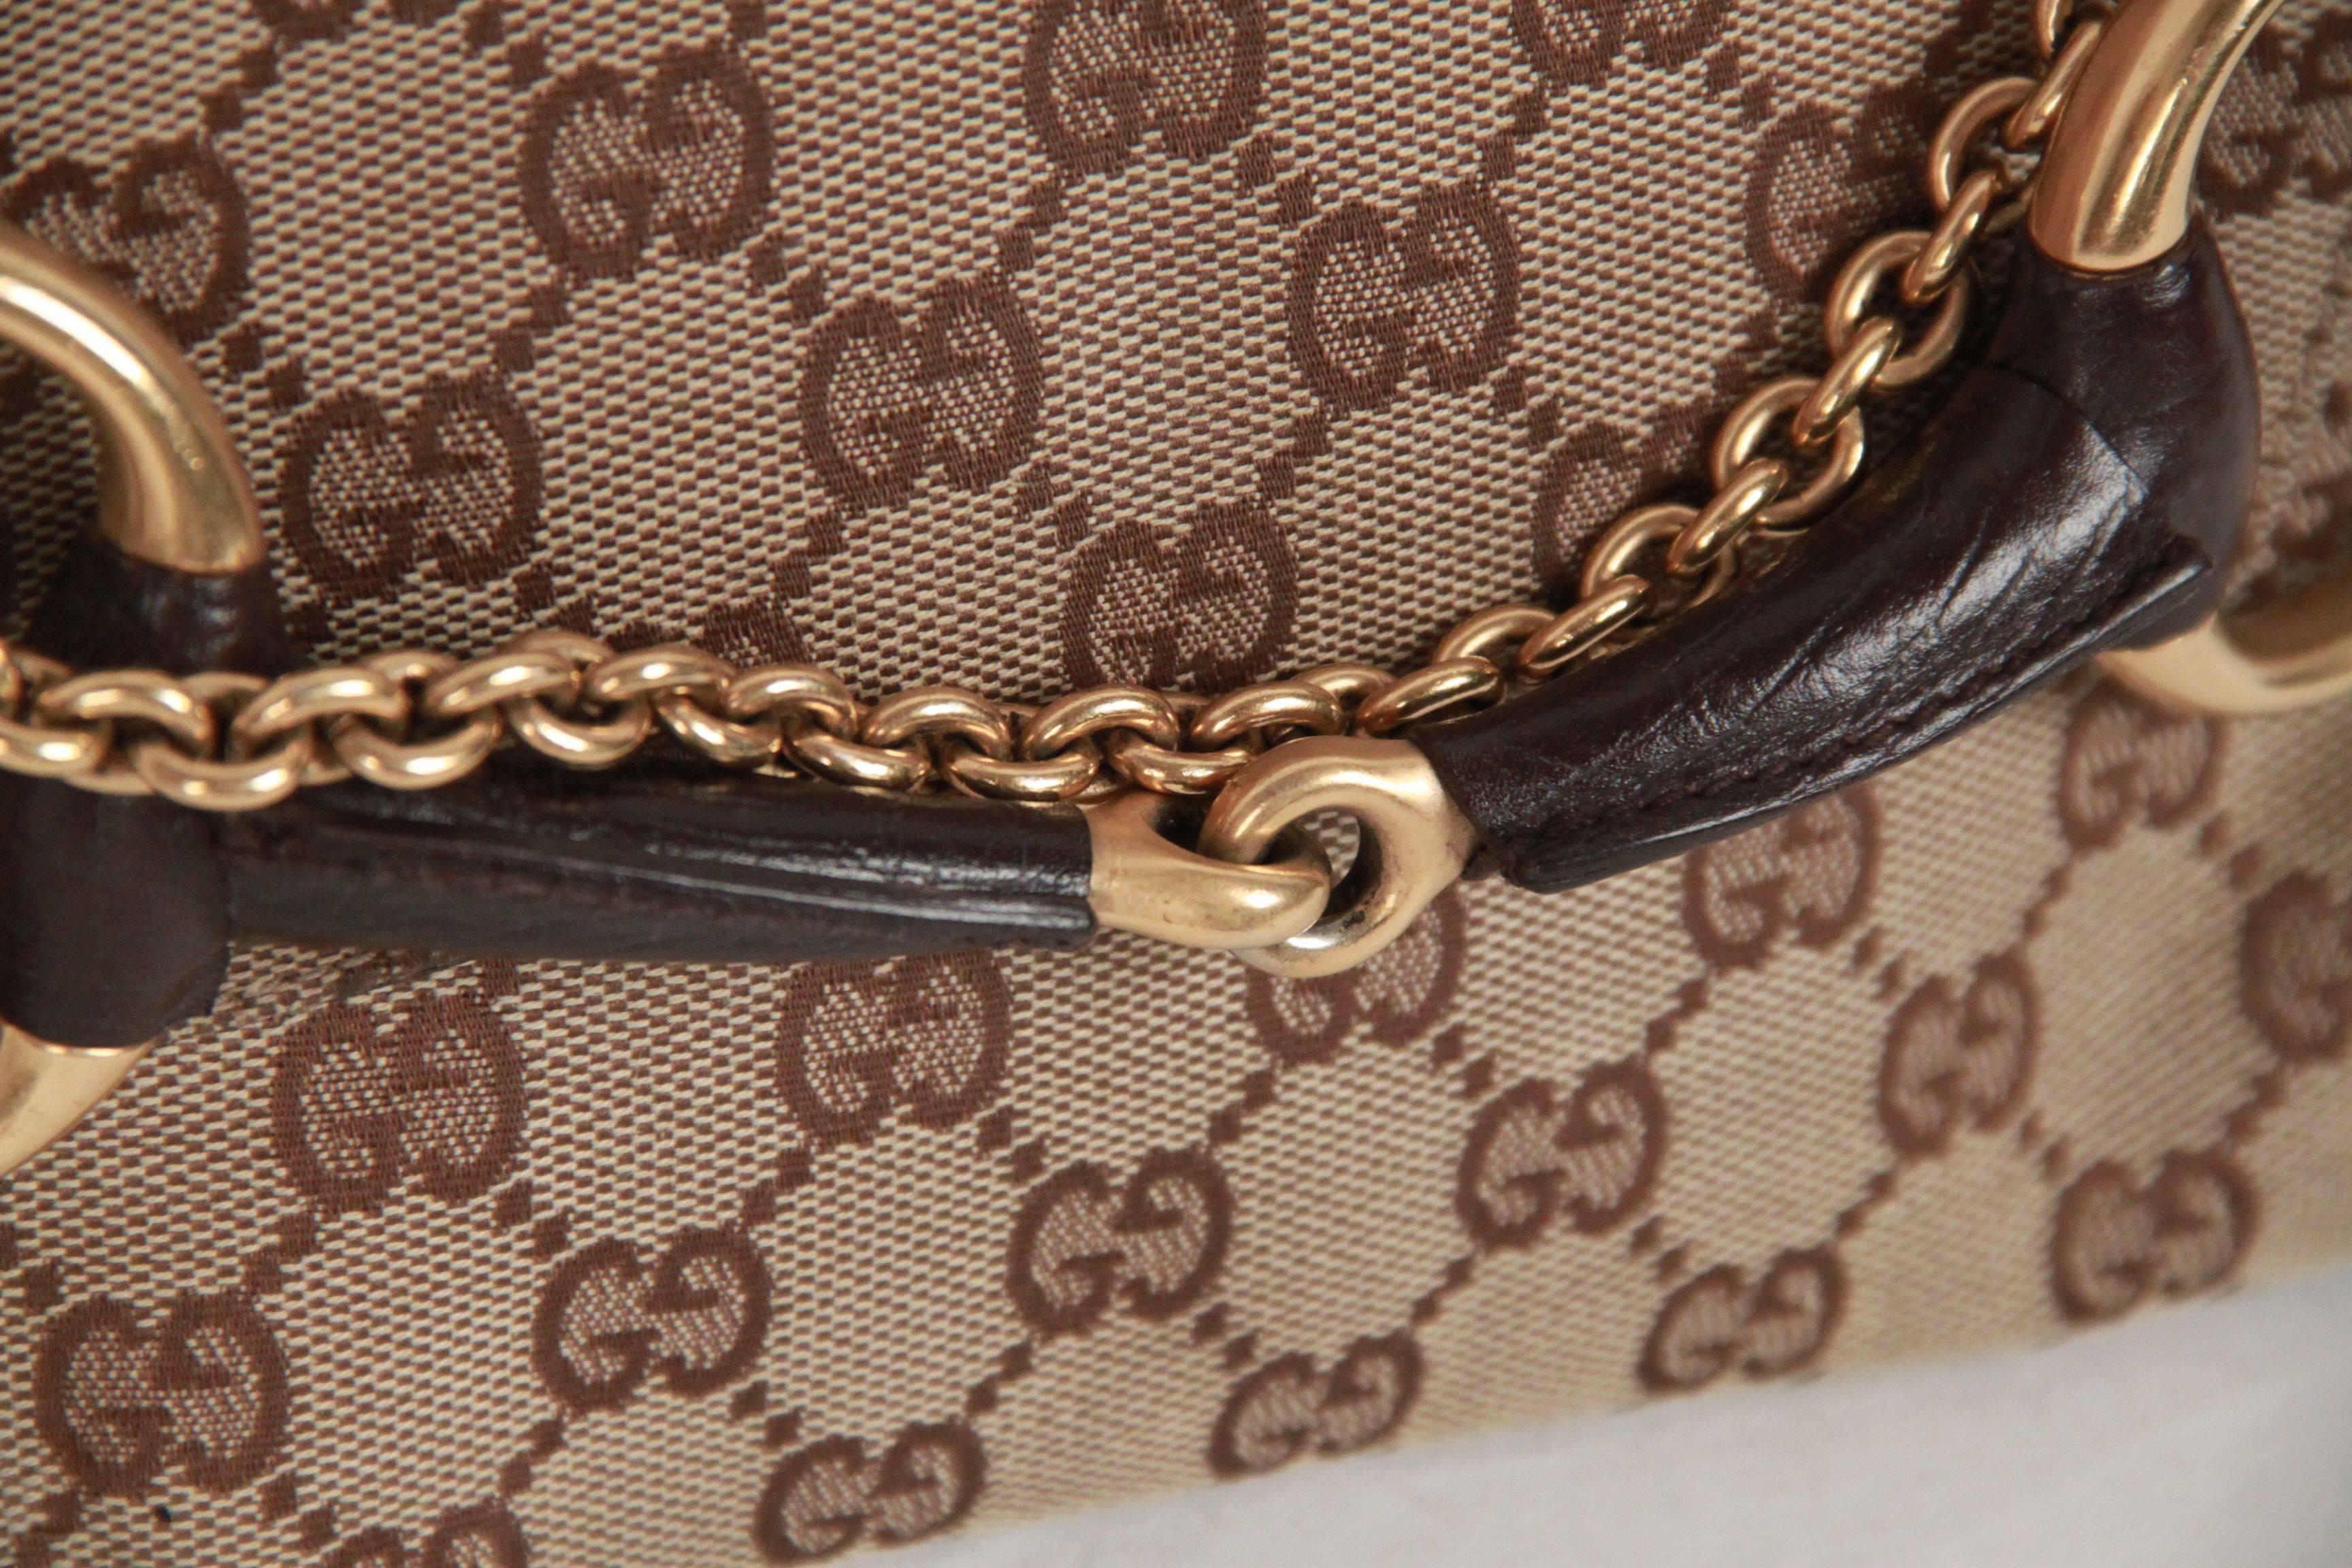 Rare Gucci clutch shoulder bag from the TOM FORD Era. It is crafted in GG monogram canvas with brown leather trim. The bag  features iconic horsebit detailing on the front and removable gold metal chain strap. Can be worn as a shoulder bag or as a